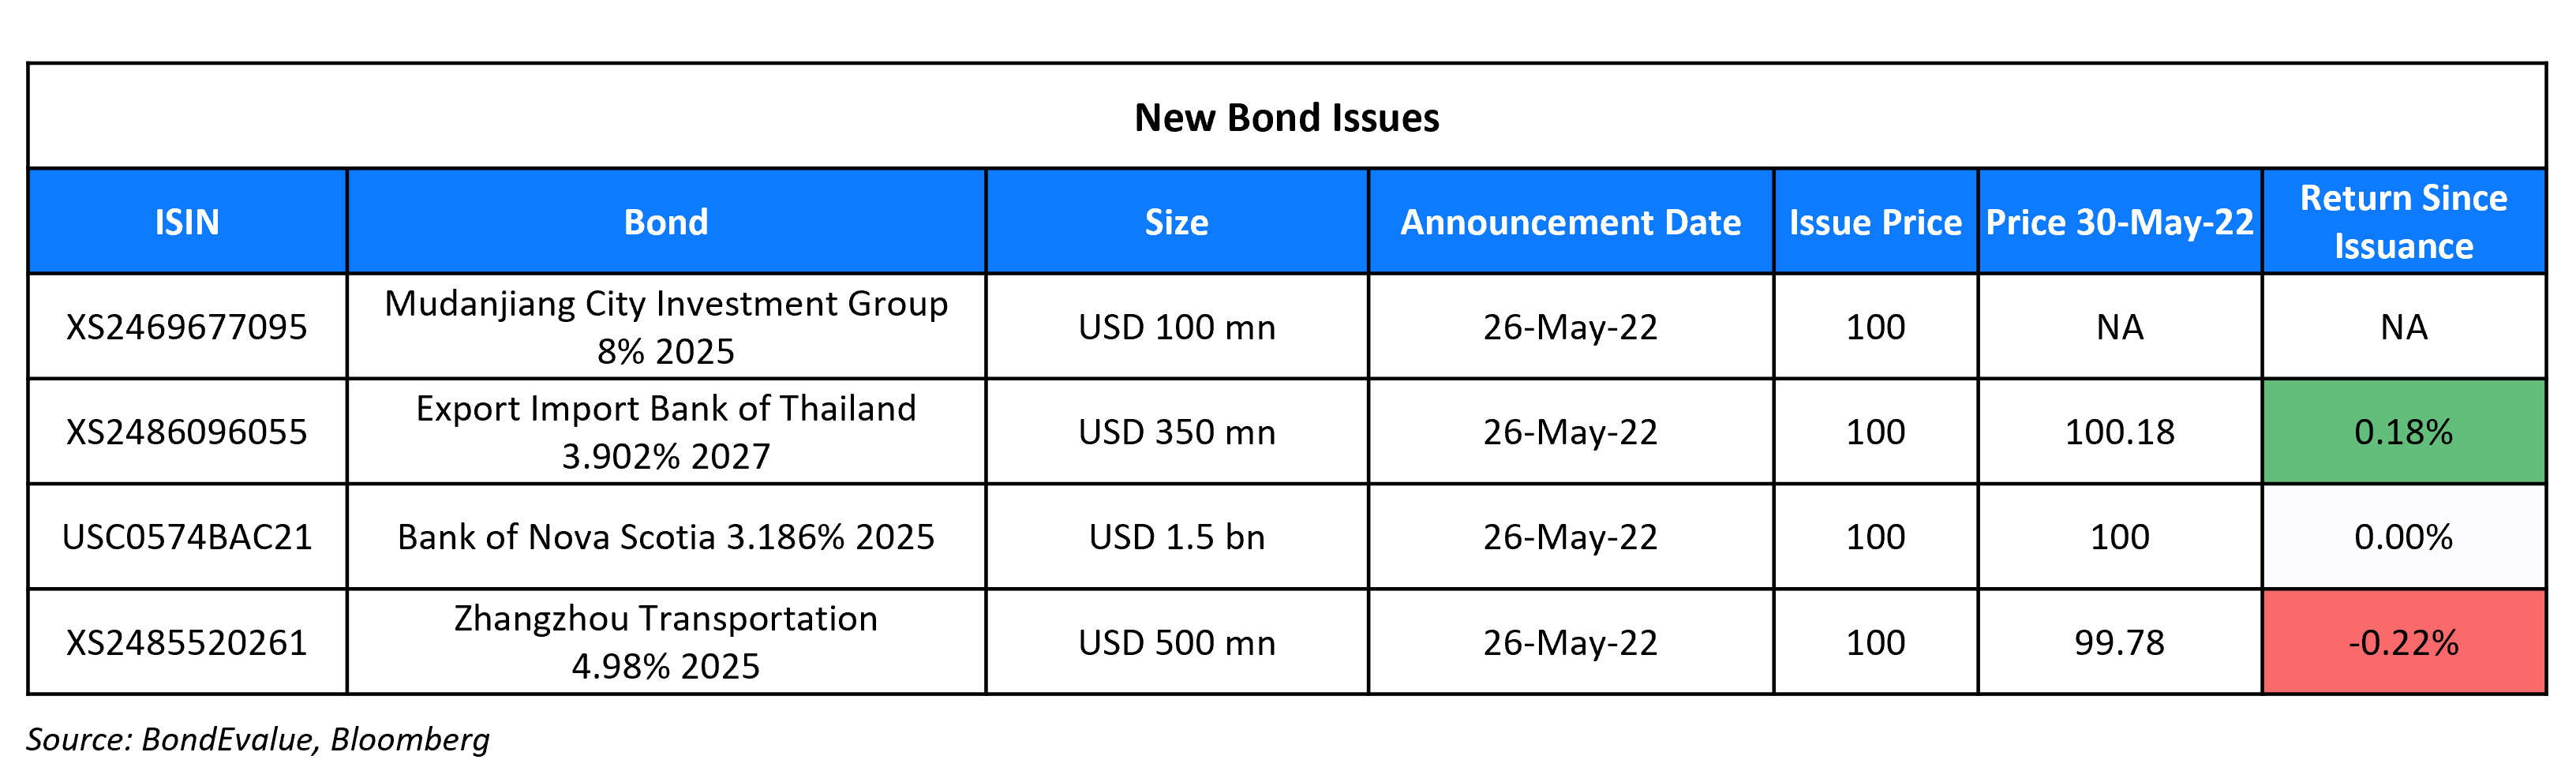 New Bond Issues 30 May 22